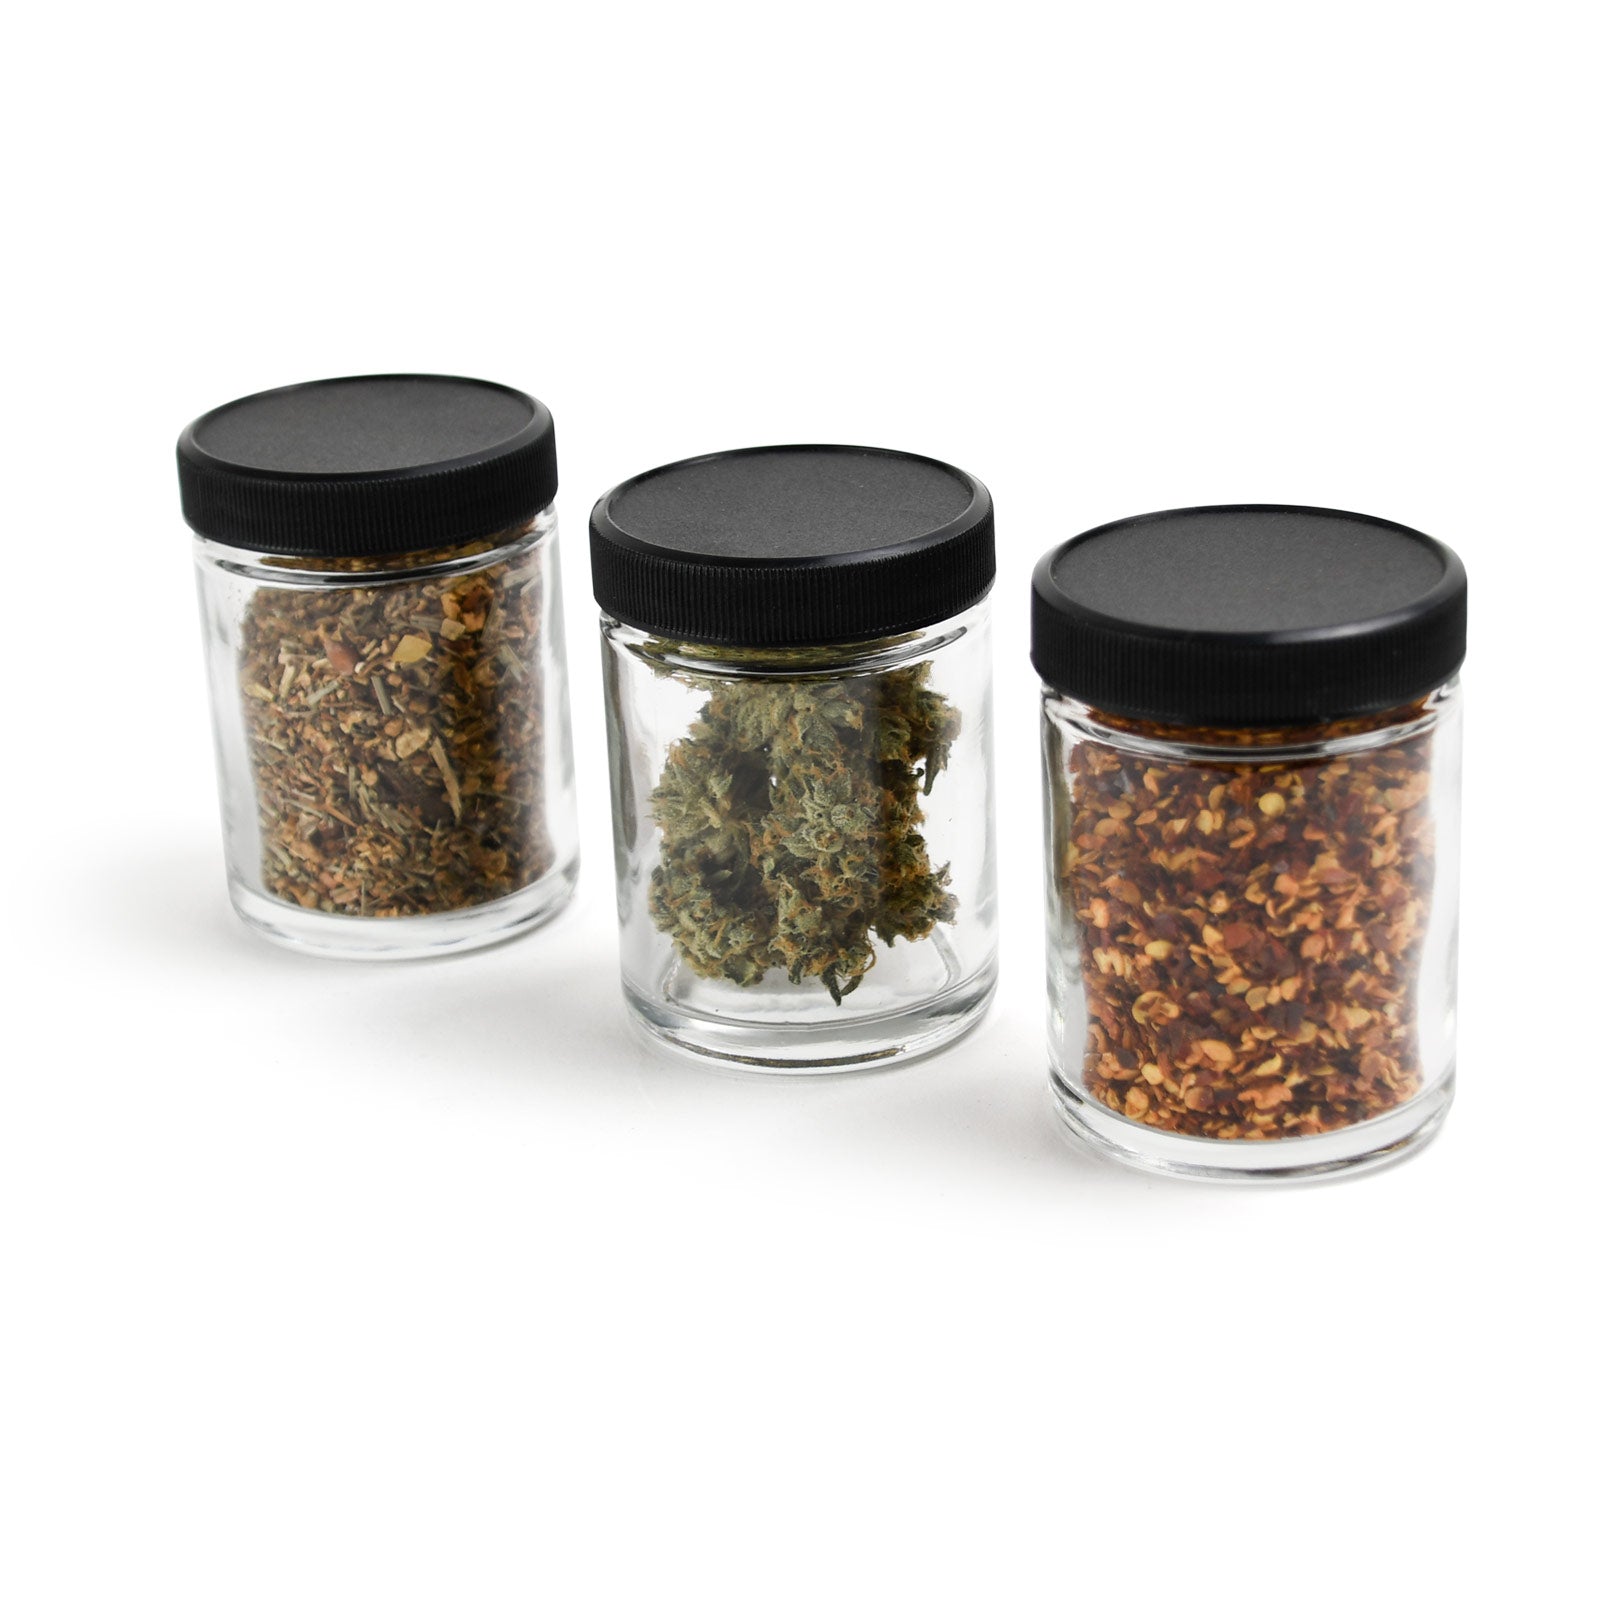 4oz Glass Jars With Black Caps - 7 Grams - 120 Count